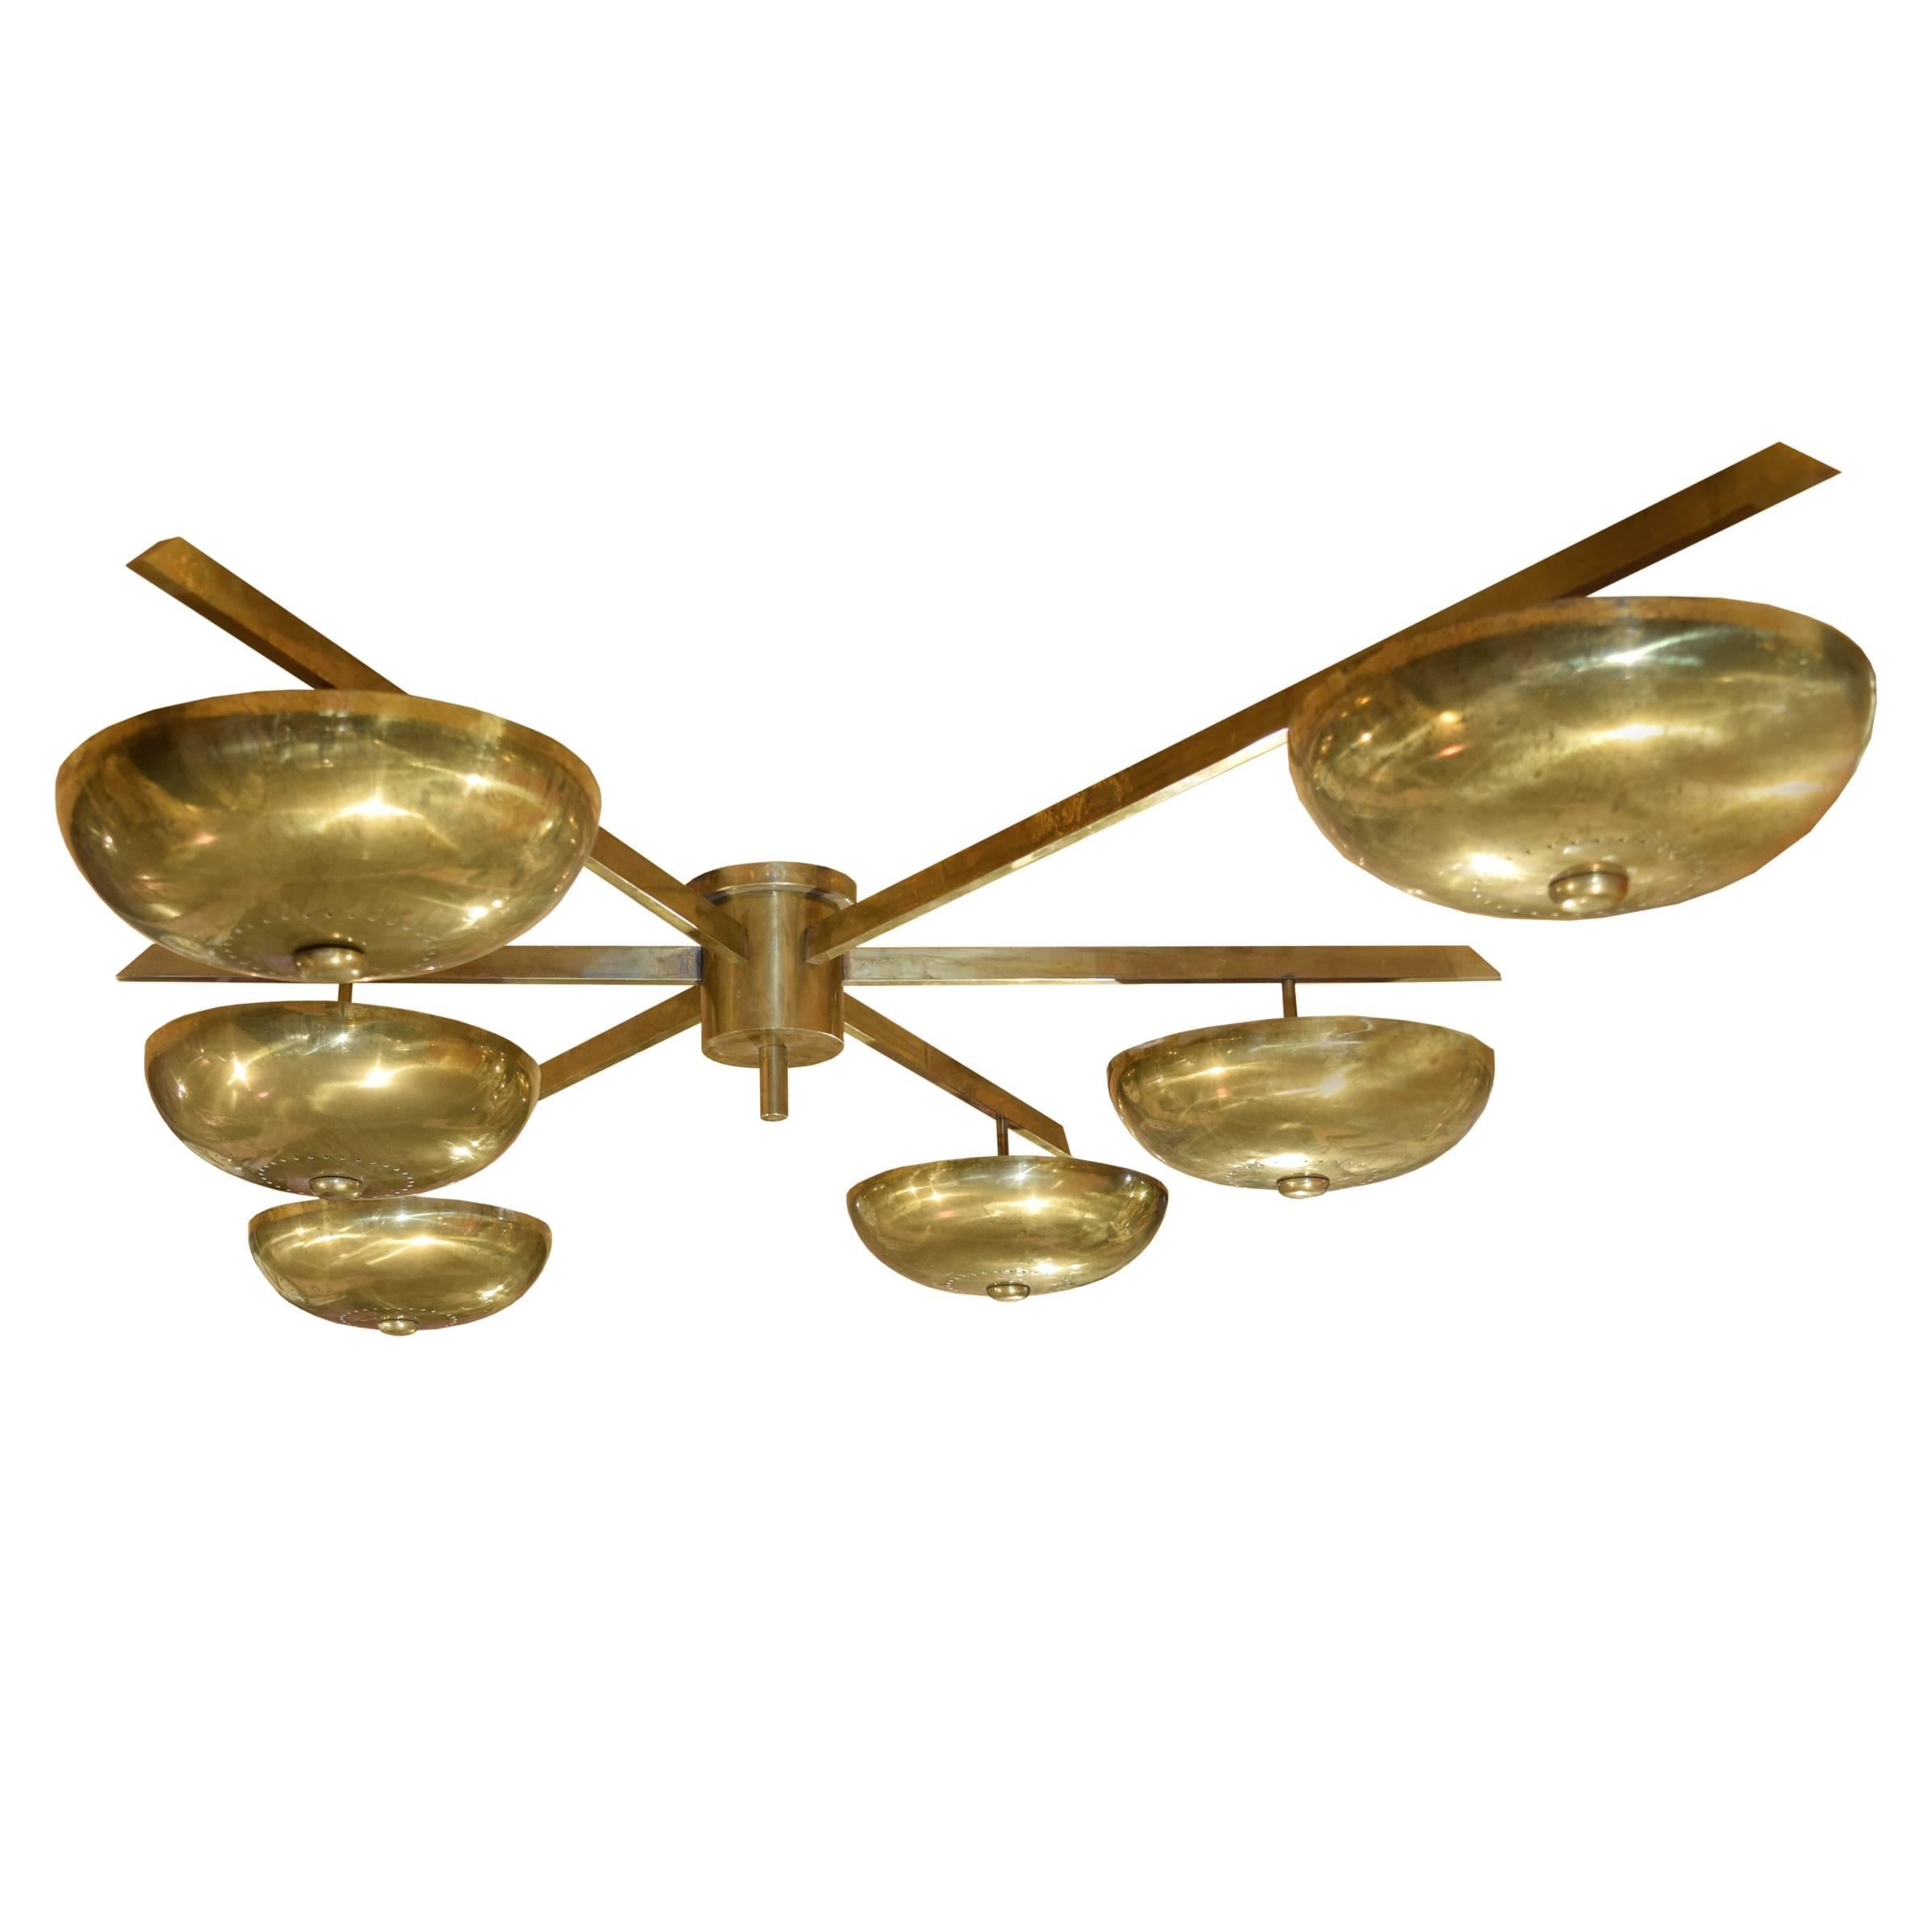 An Italian Arredoluce style brass flush mount chandelier, designed by Angelo Lelii, with an asymmetrical design consisting of six arms with dome shades. 
Requires re-wiring.